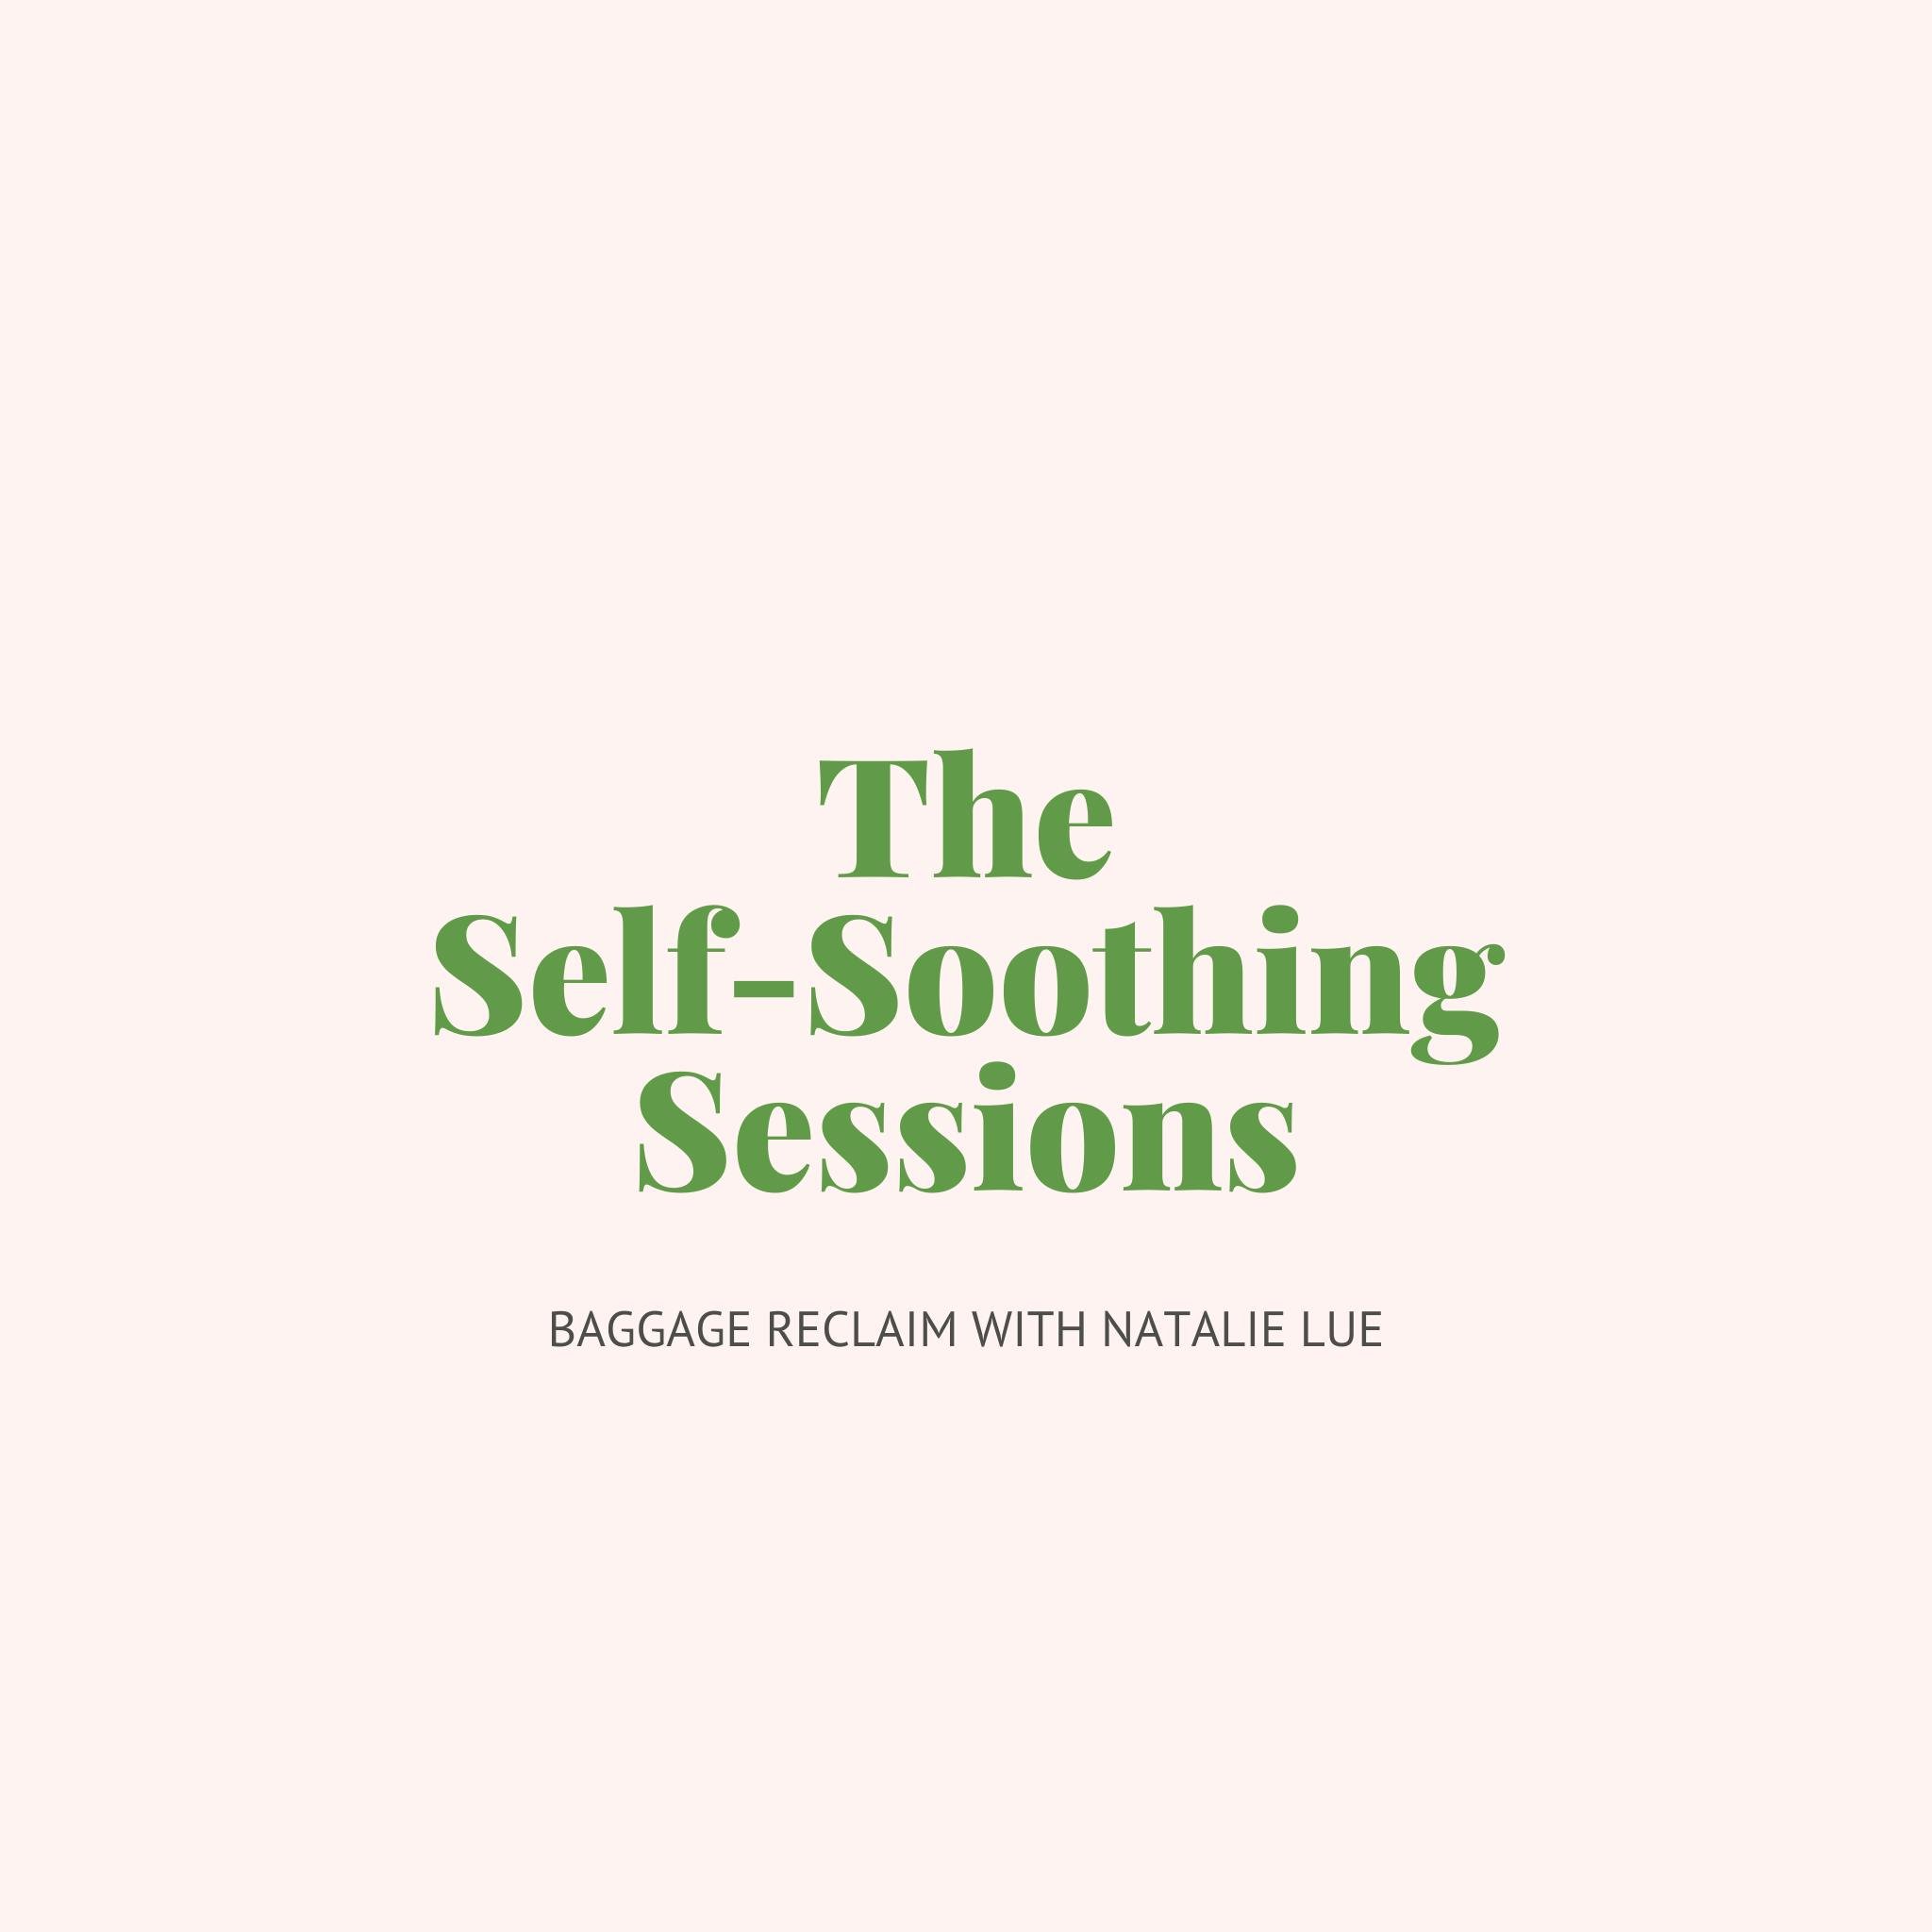 The Self-Soothing Sessions